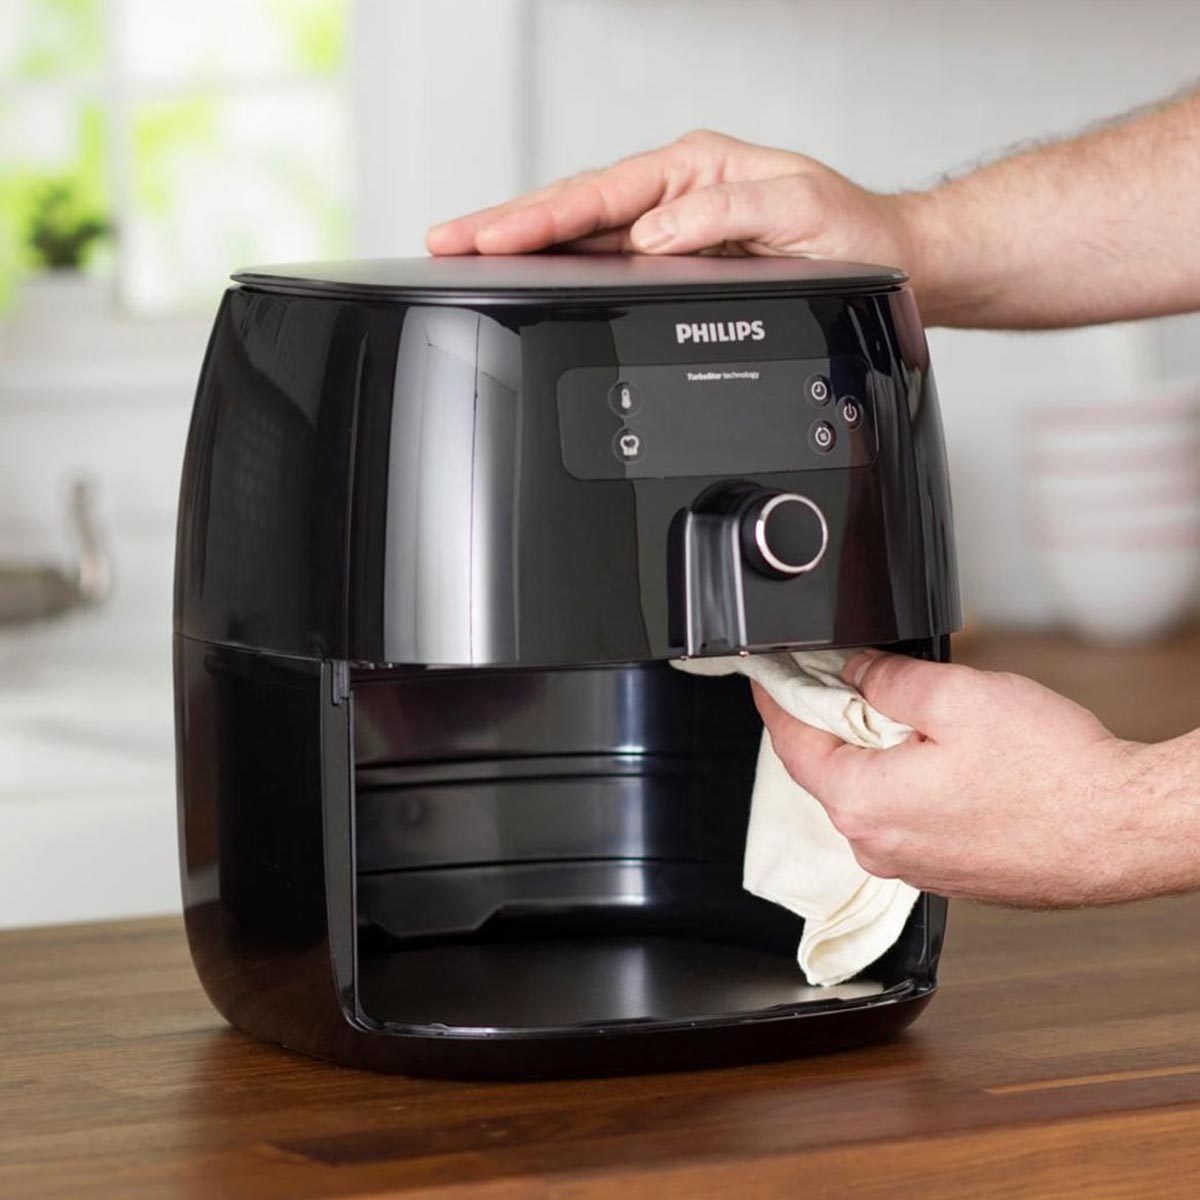 How To Effortlessly Remove Basket From Air Fryer